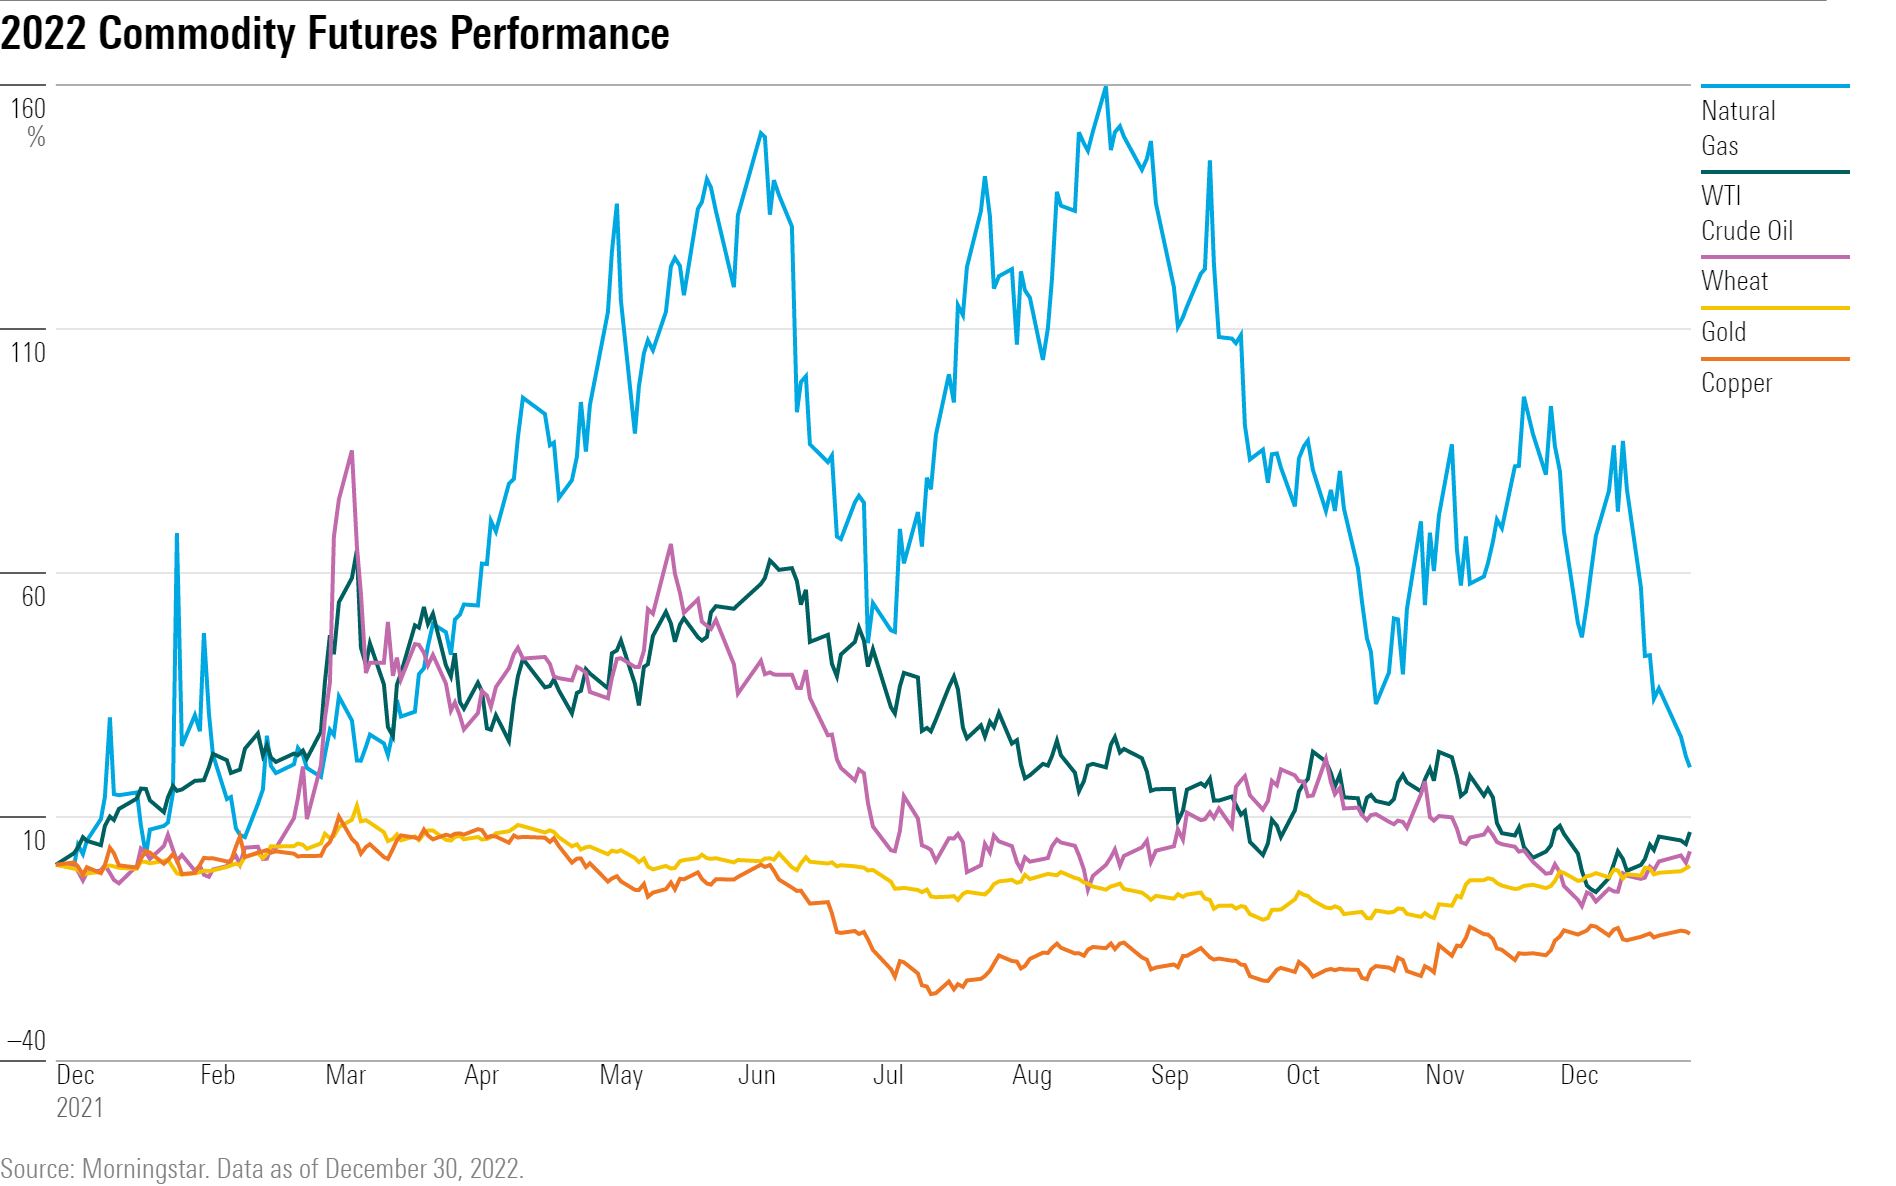 Performance of natural gas, WTI crude oil, wheat, gold, and copper futures in 2022.